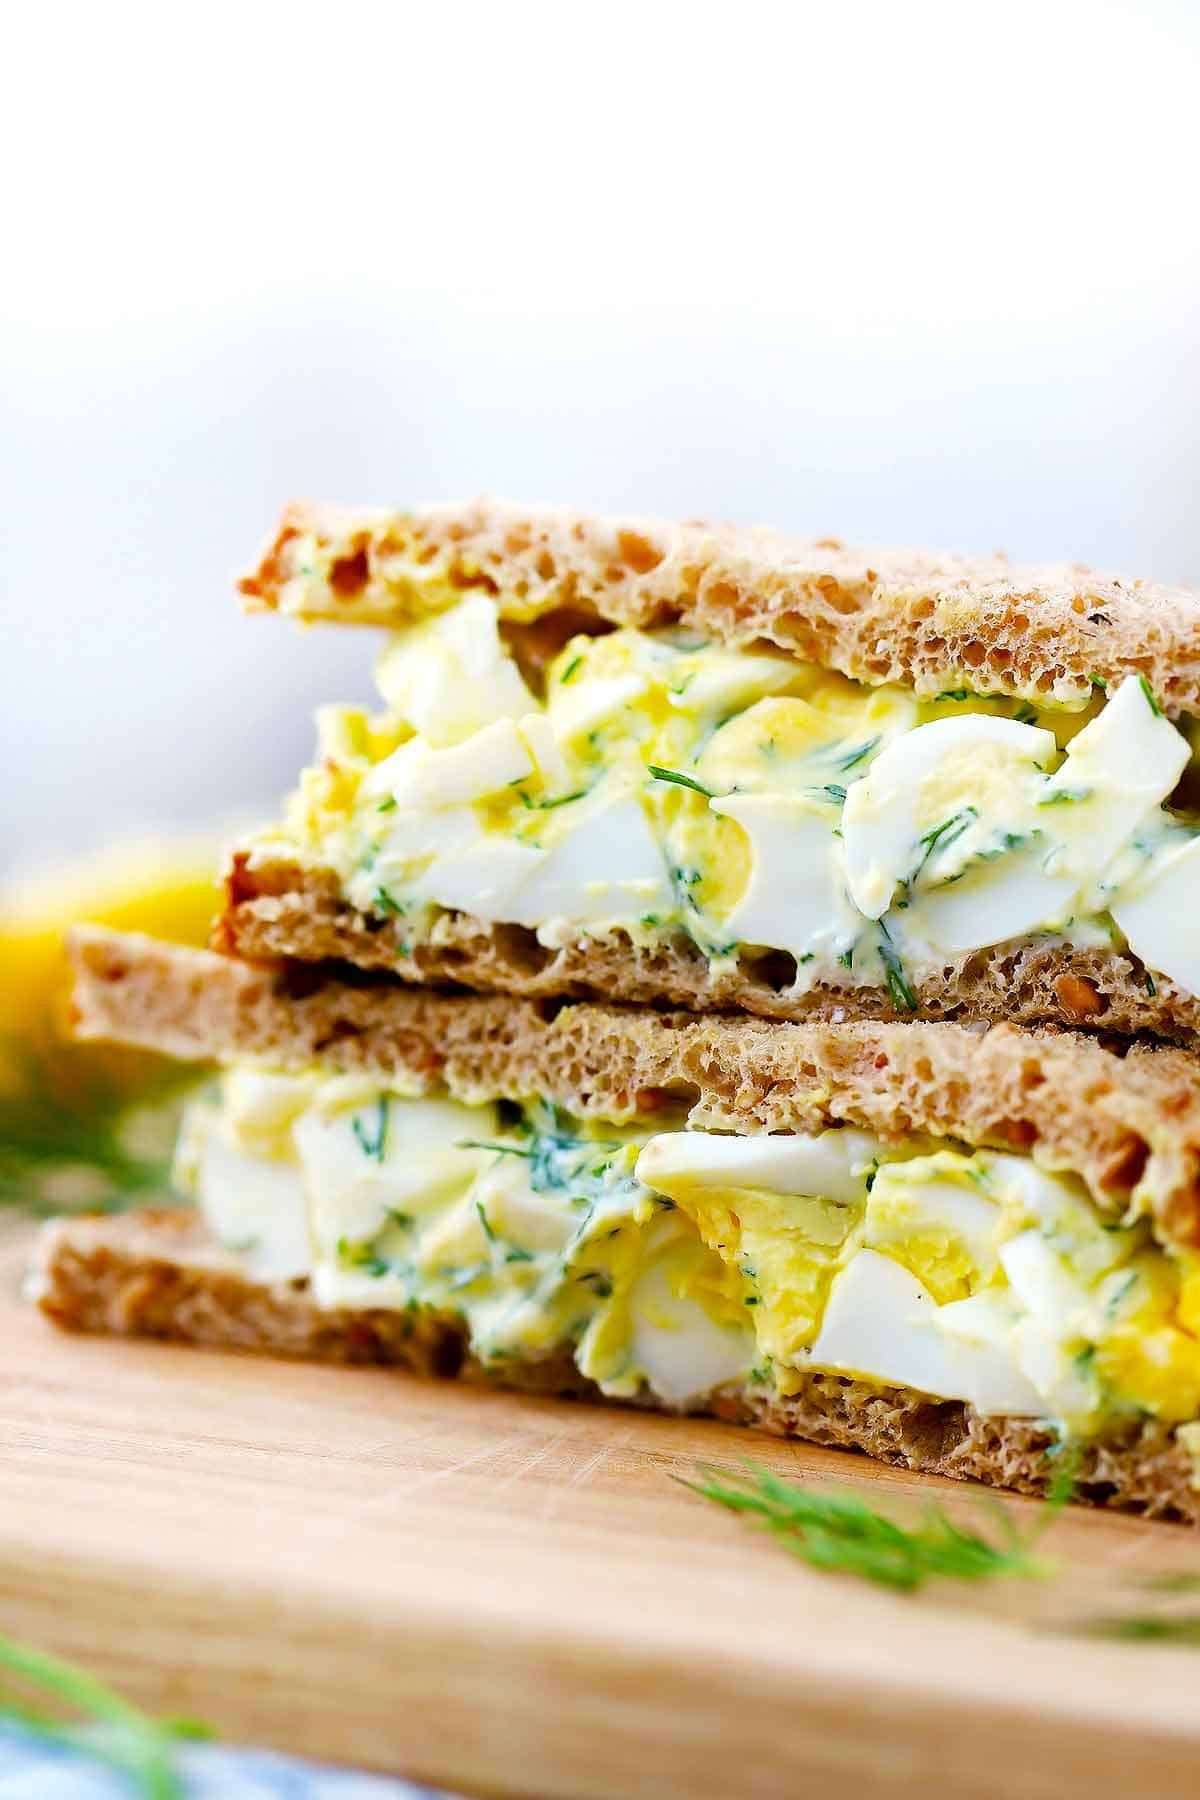 How Many Calories In An Egg Salad Sandwich On Rye Bread ...